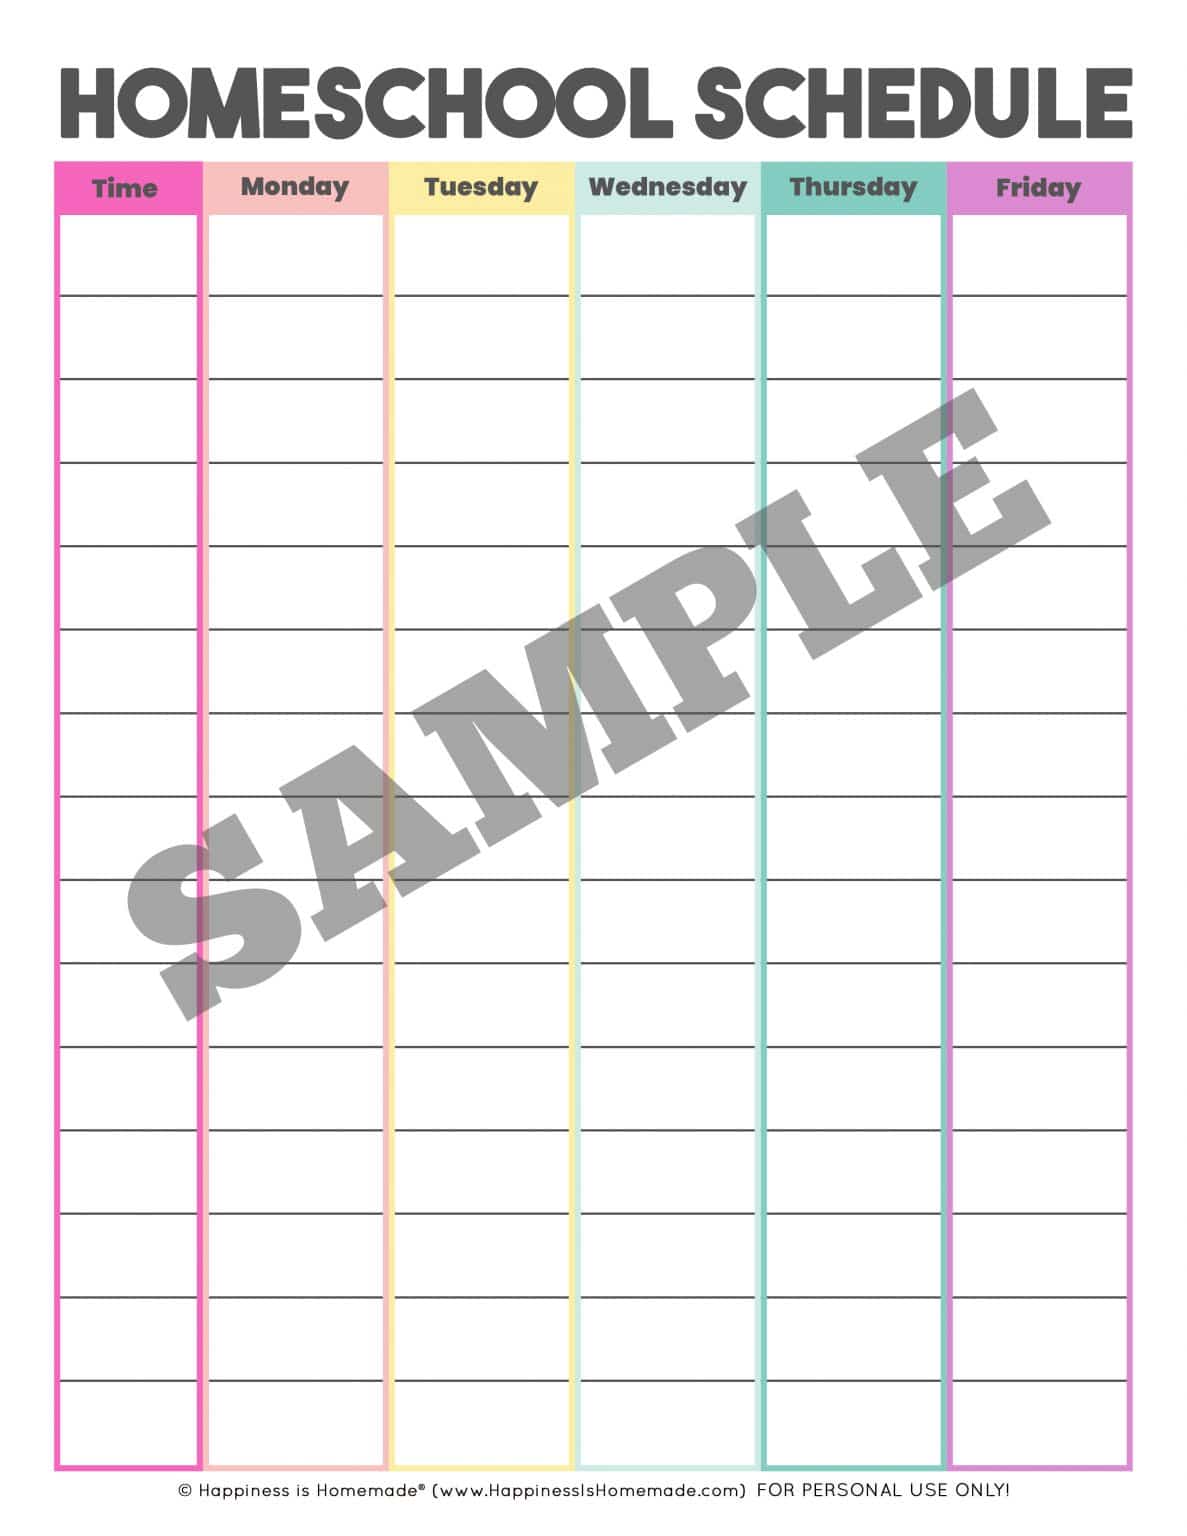 Homeschool Schedule Template: Free Printable - Happiness is Homemade